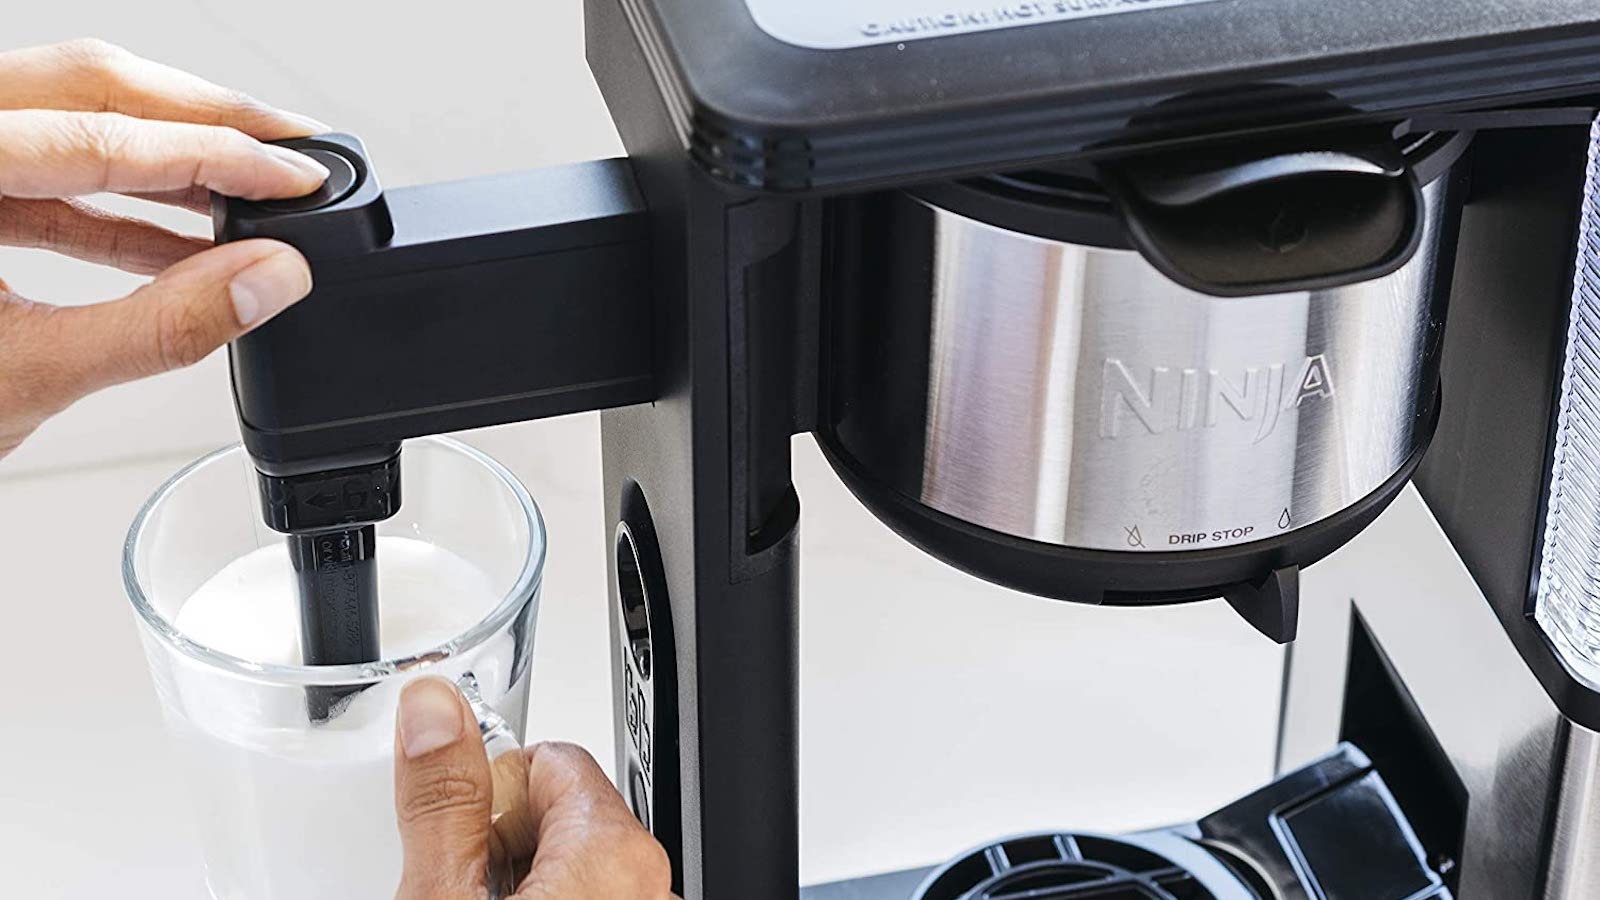 Ninja Specialty Coffee Maker brings coffee quality home with six brew sizes